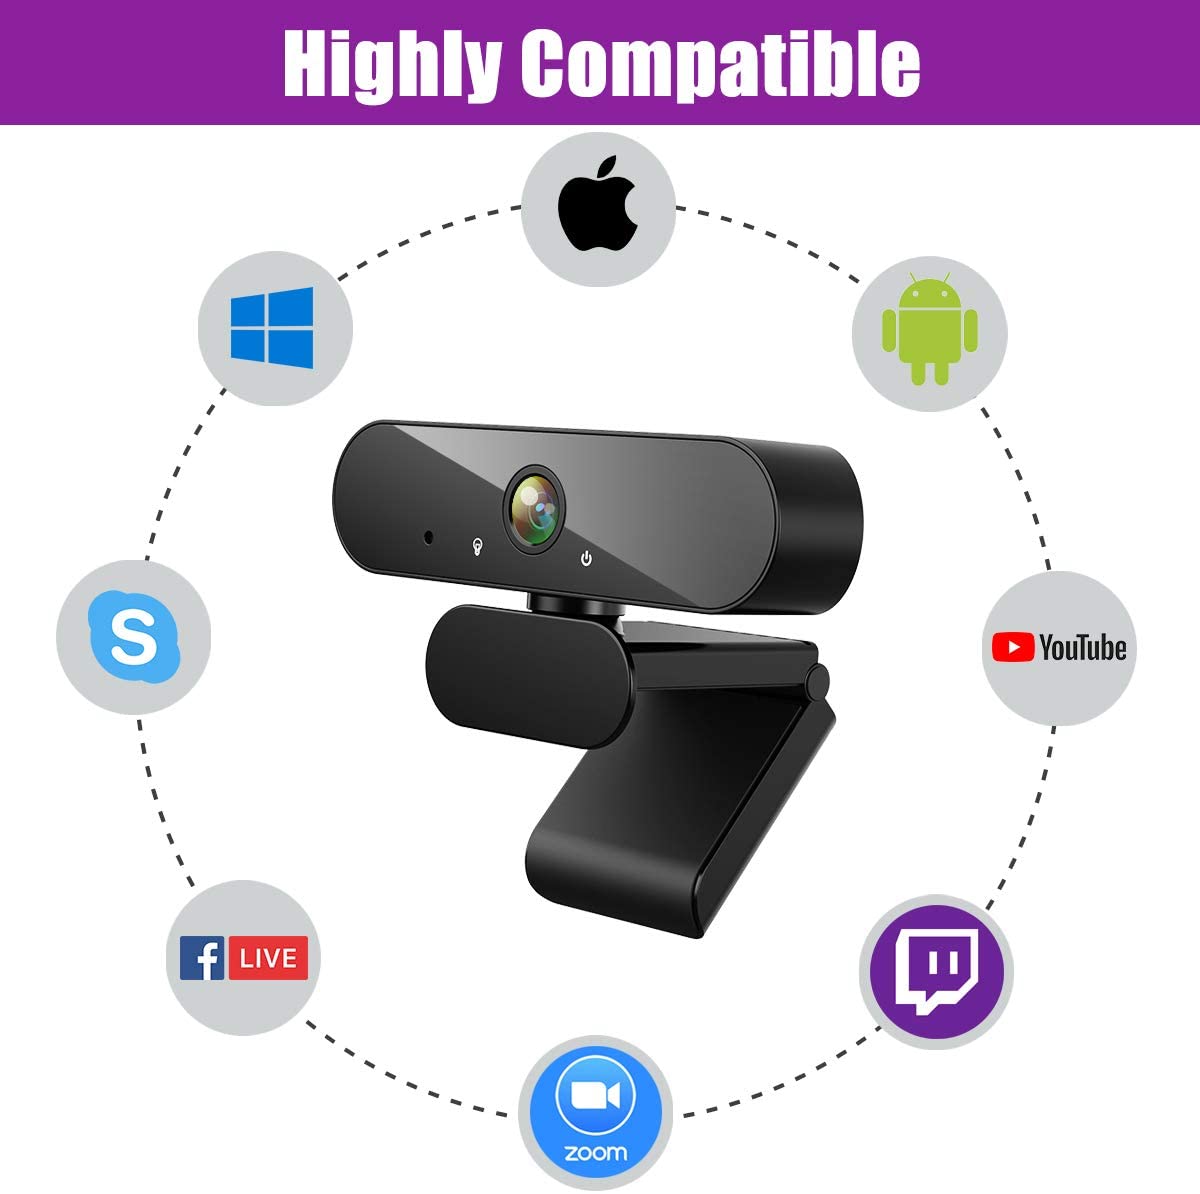 Webcam 1440P HD Computer Camera, Autofocus USB PC Webcam with Microphone, HD Wide-Angle Webcam,Laptop Desktop Full HD Camera Video Webcam,Pro Streaming Webcam for Recording,Calling Conferencing,Gaming - image 5 of 9